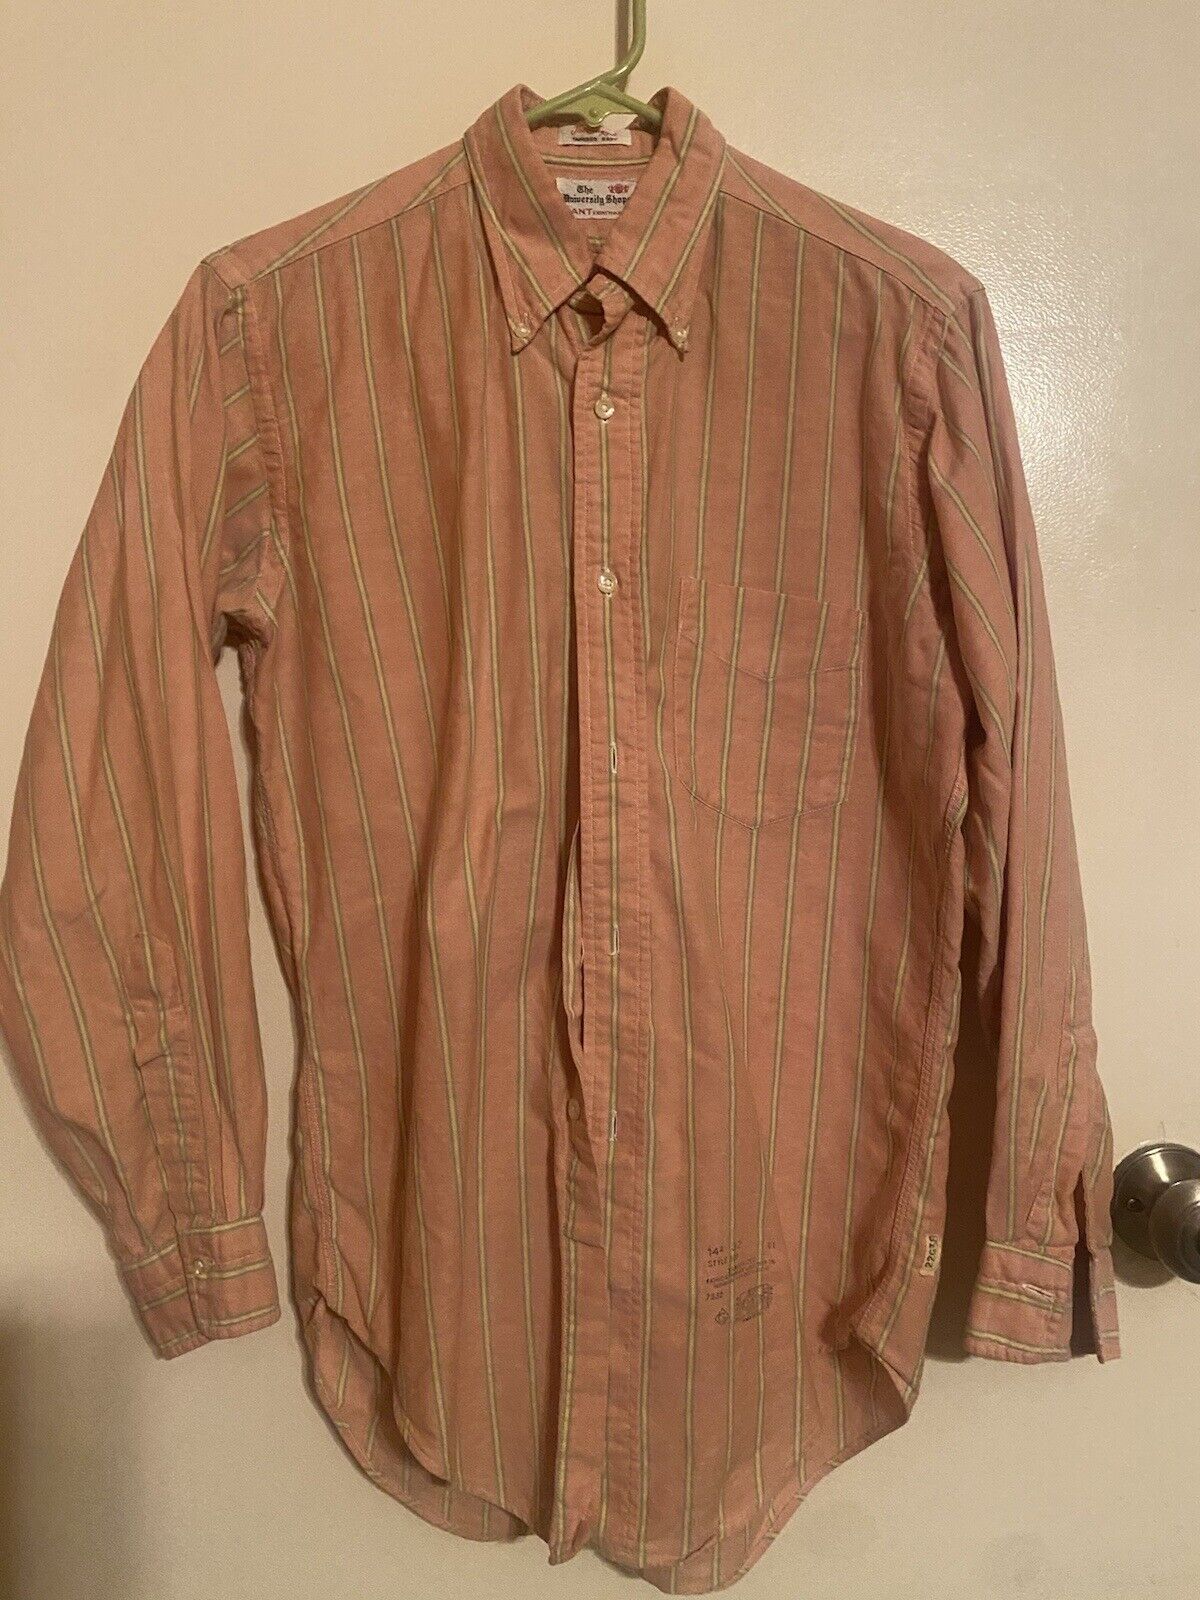 vintage mens 1960s/1970s pink and green striped gant oxford shirt small 14.5 32